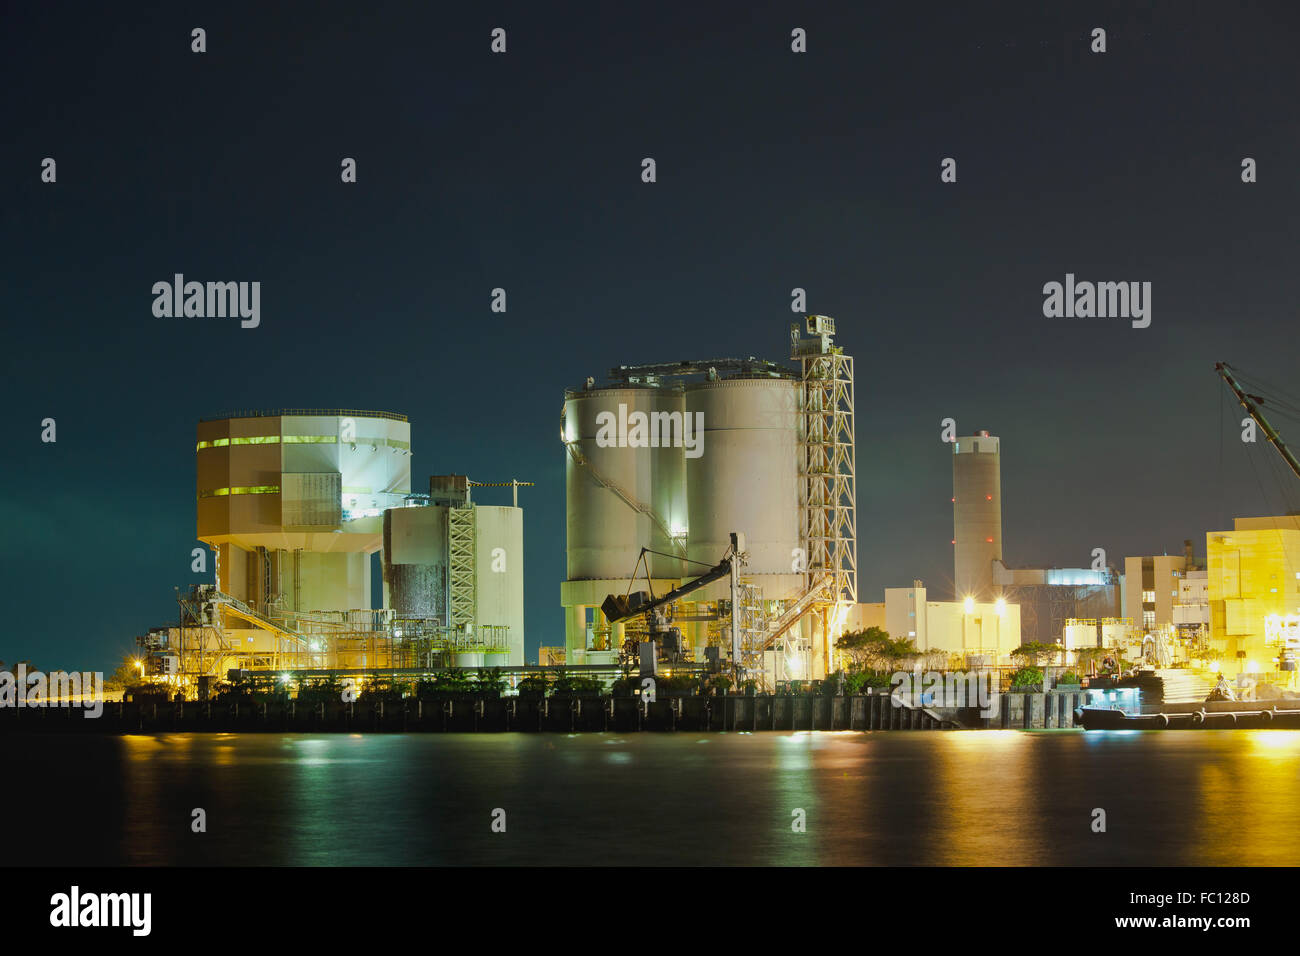 Oil tanks at night in gas factory Stock Photo